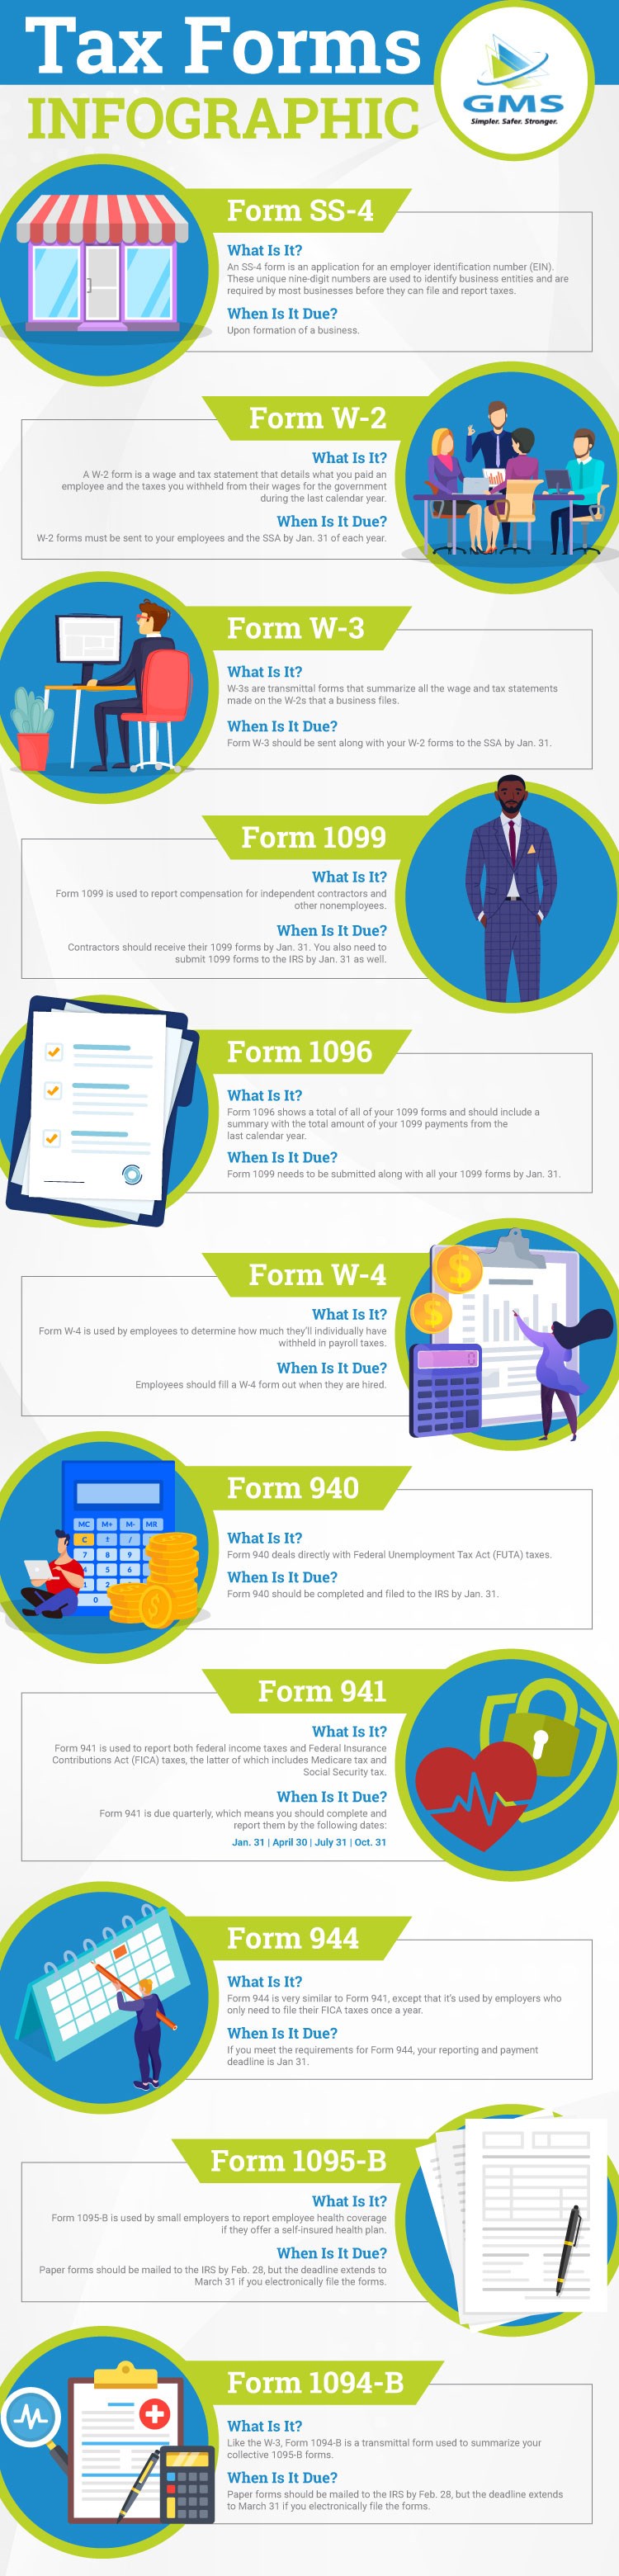 Payroll Forms: A Guide for Small Business Owners